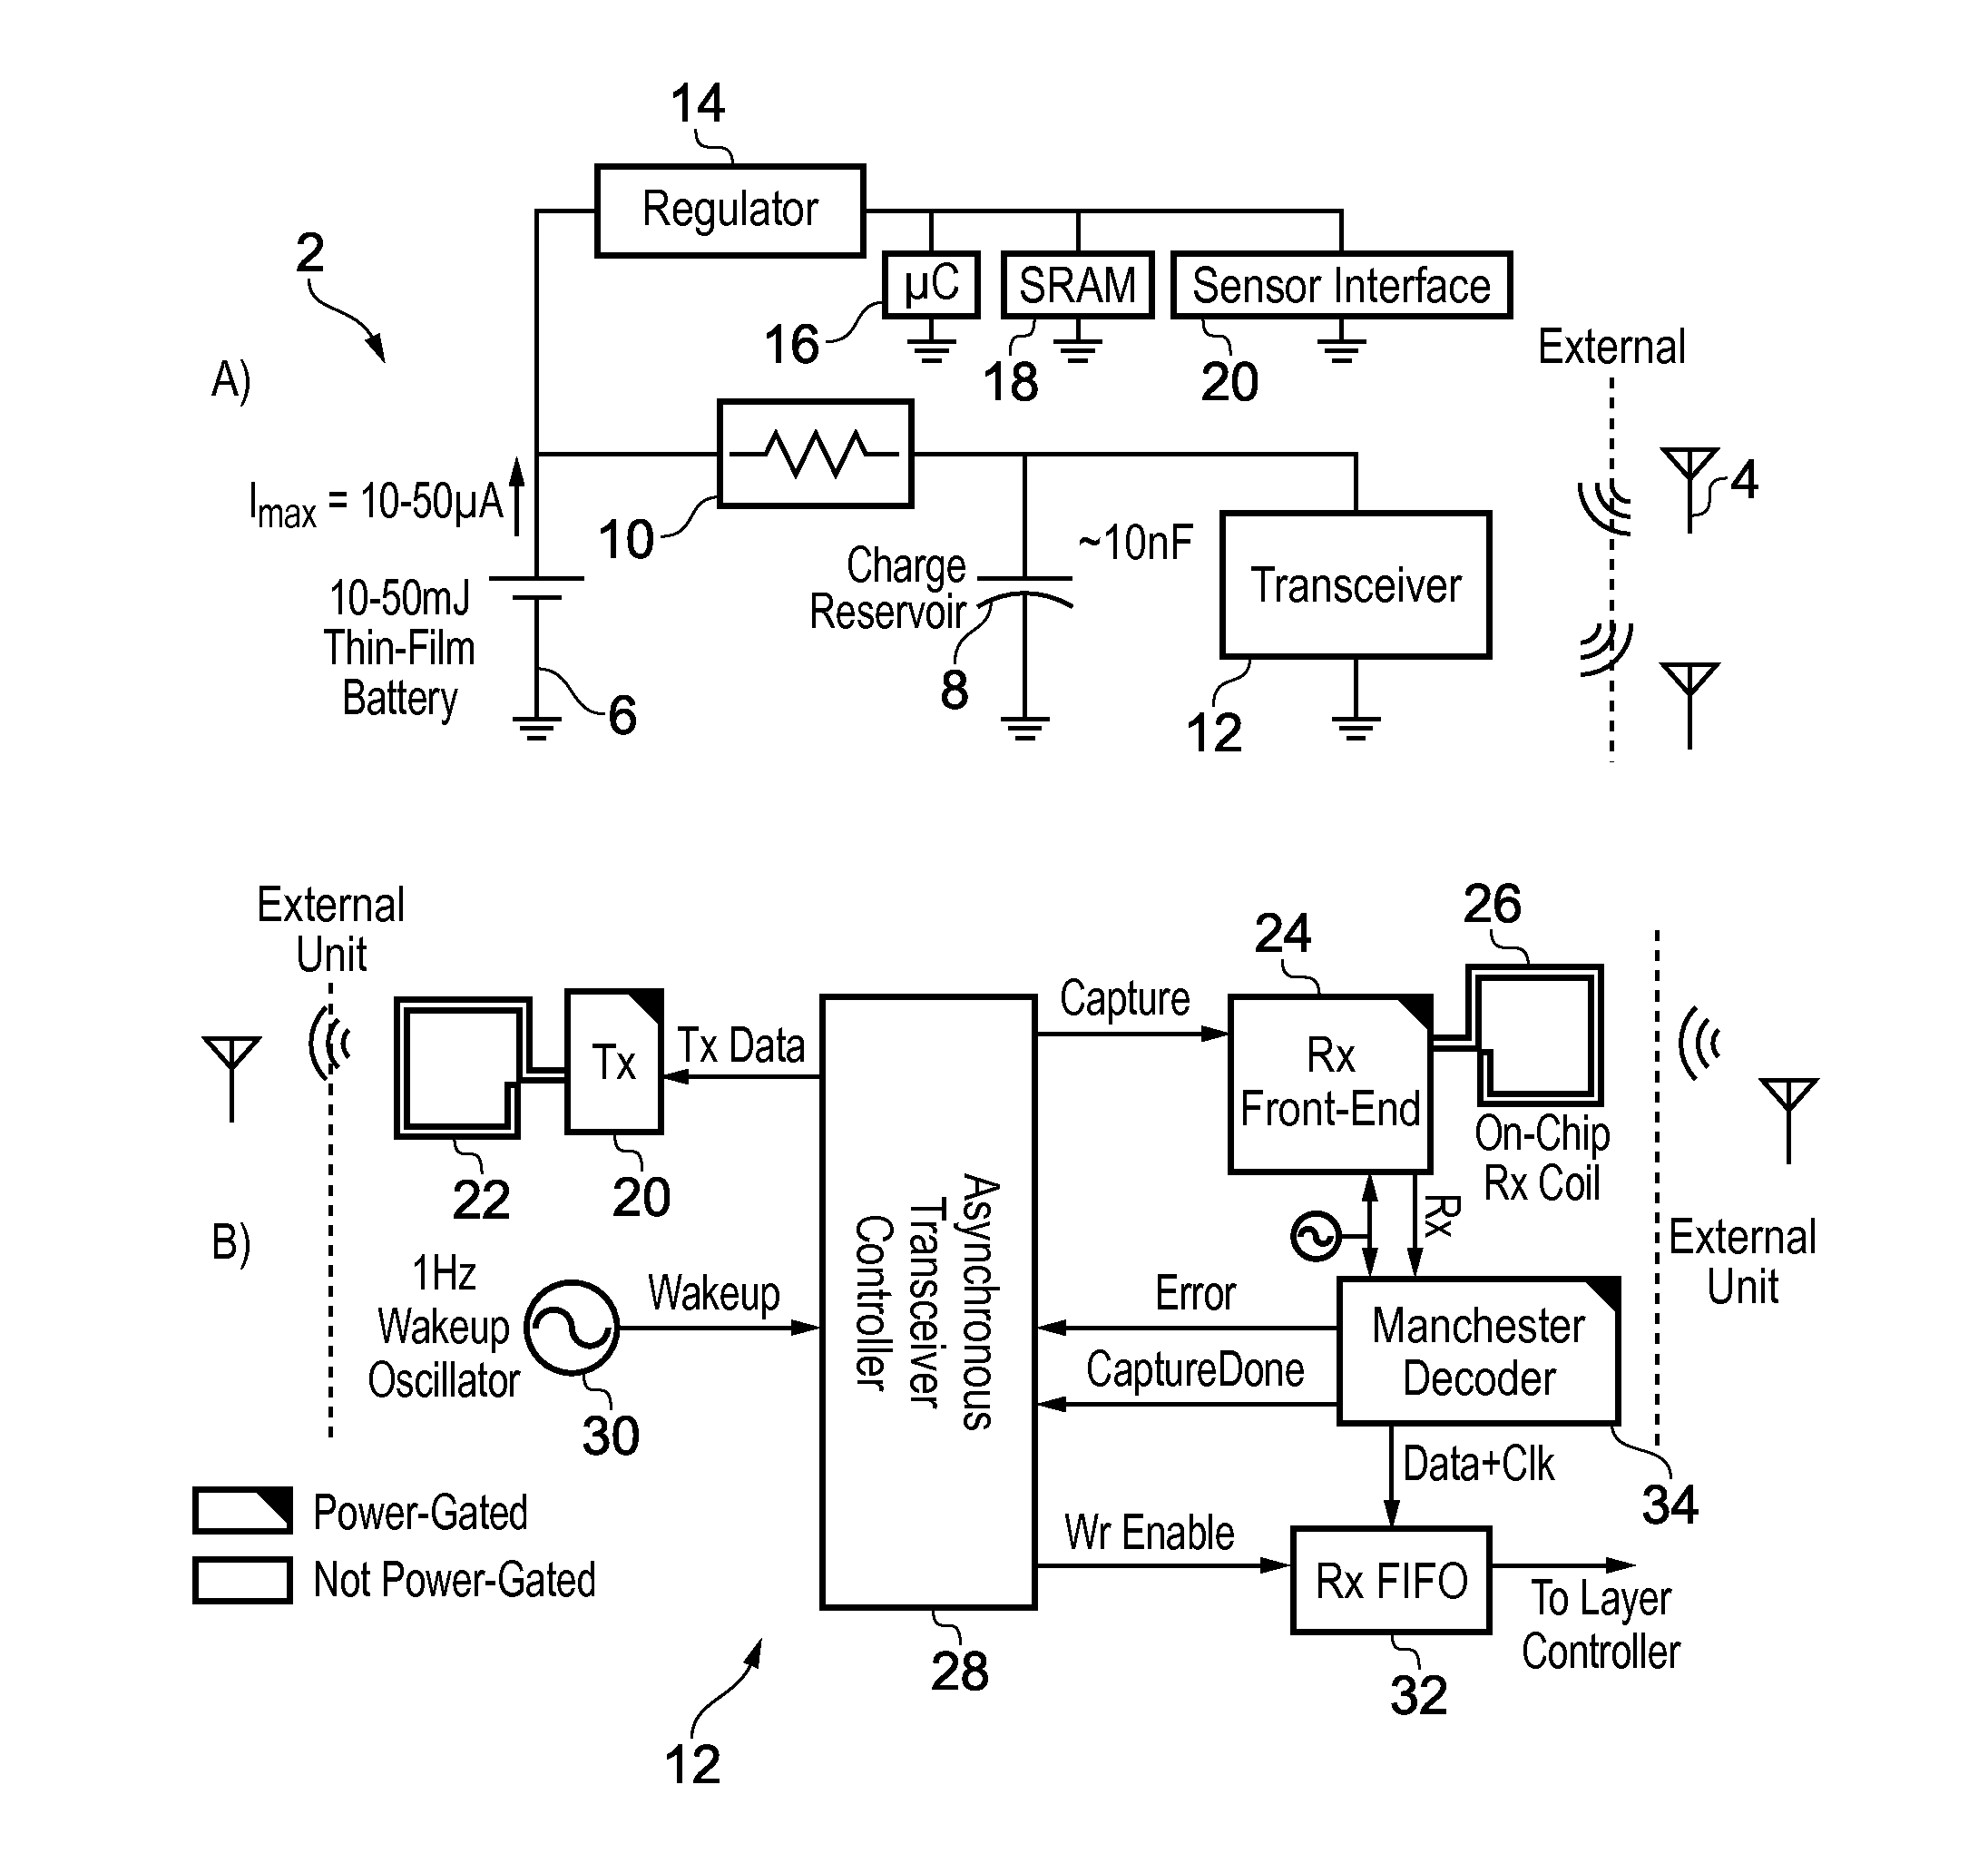 Protocol for an electronic device to receive a data packet from an external device